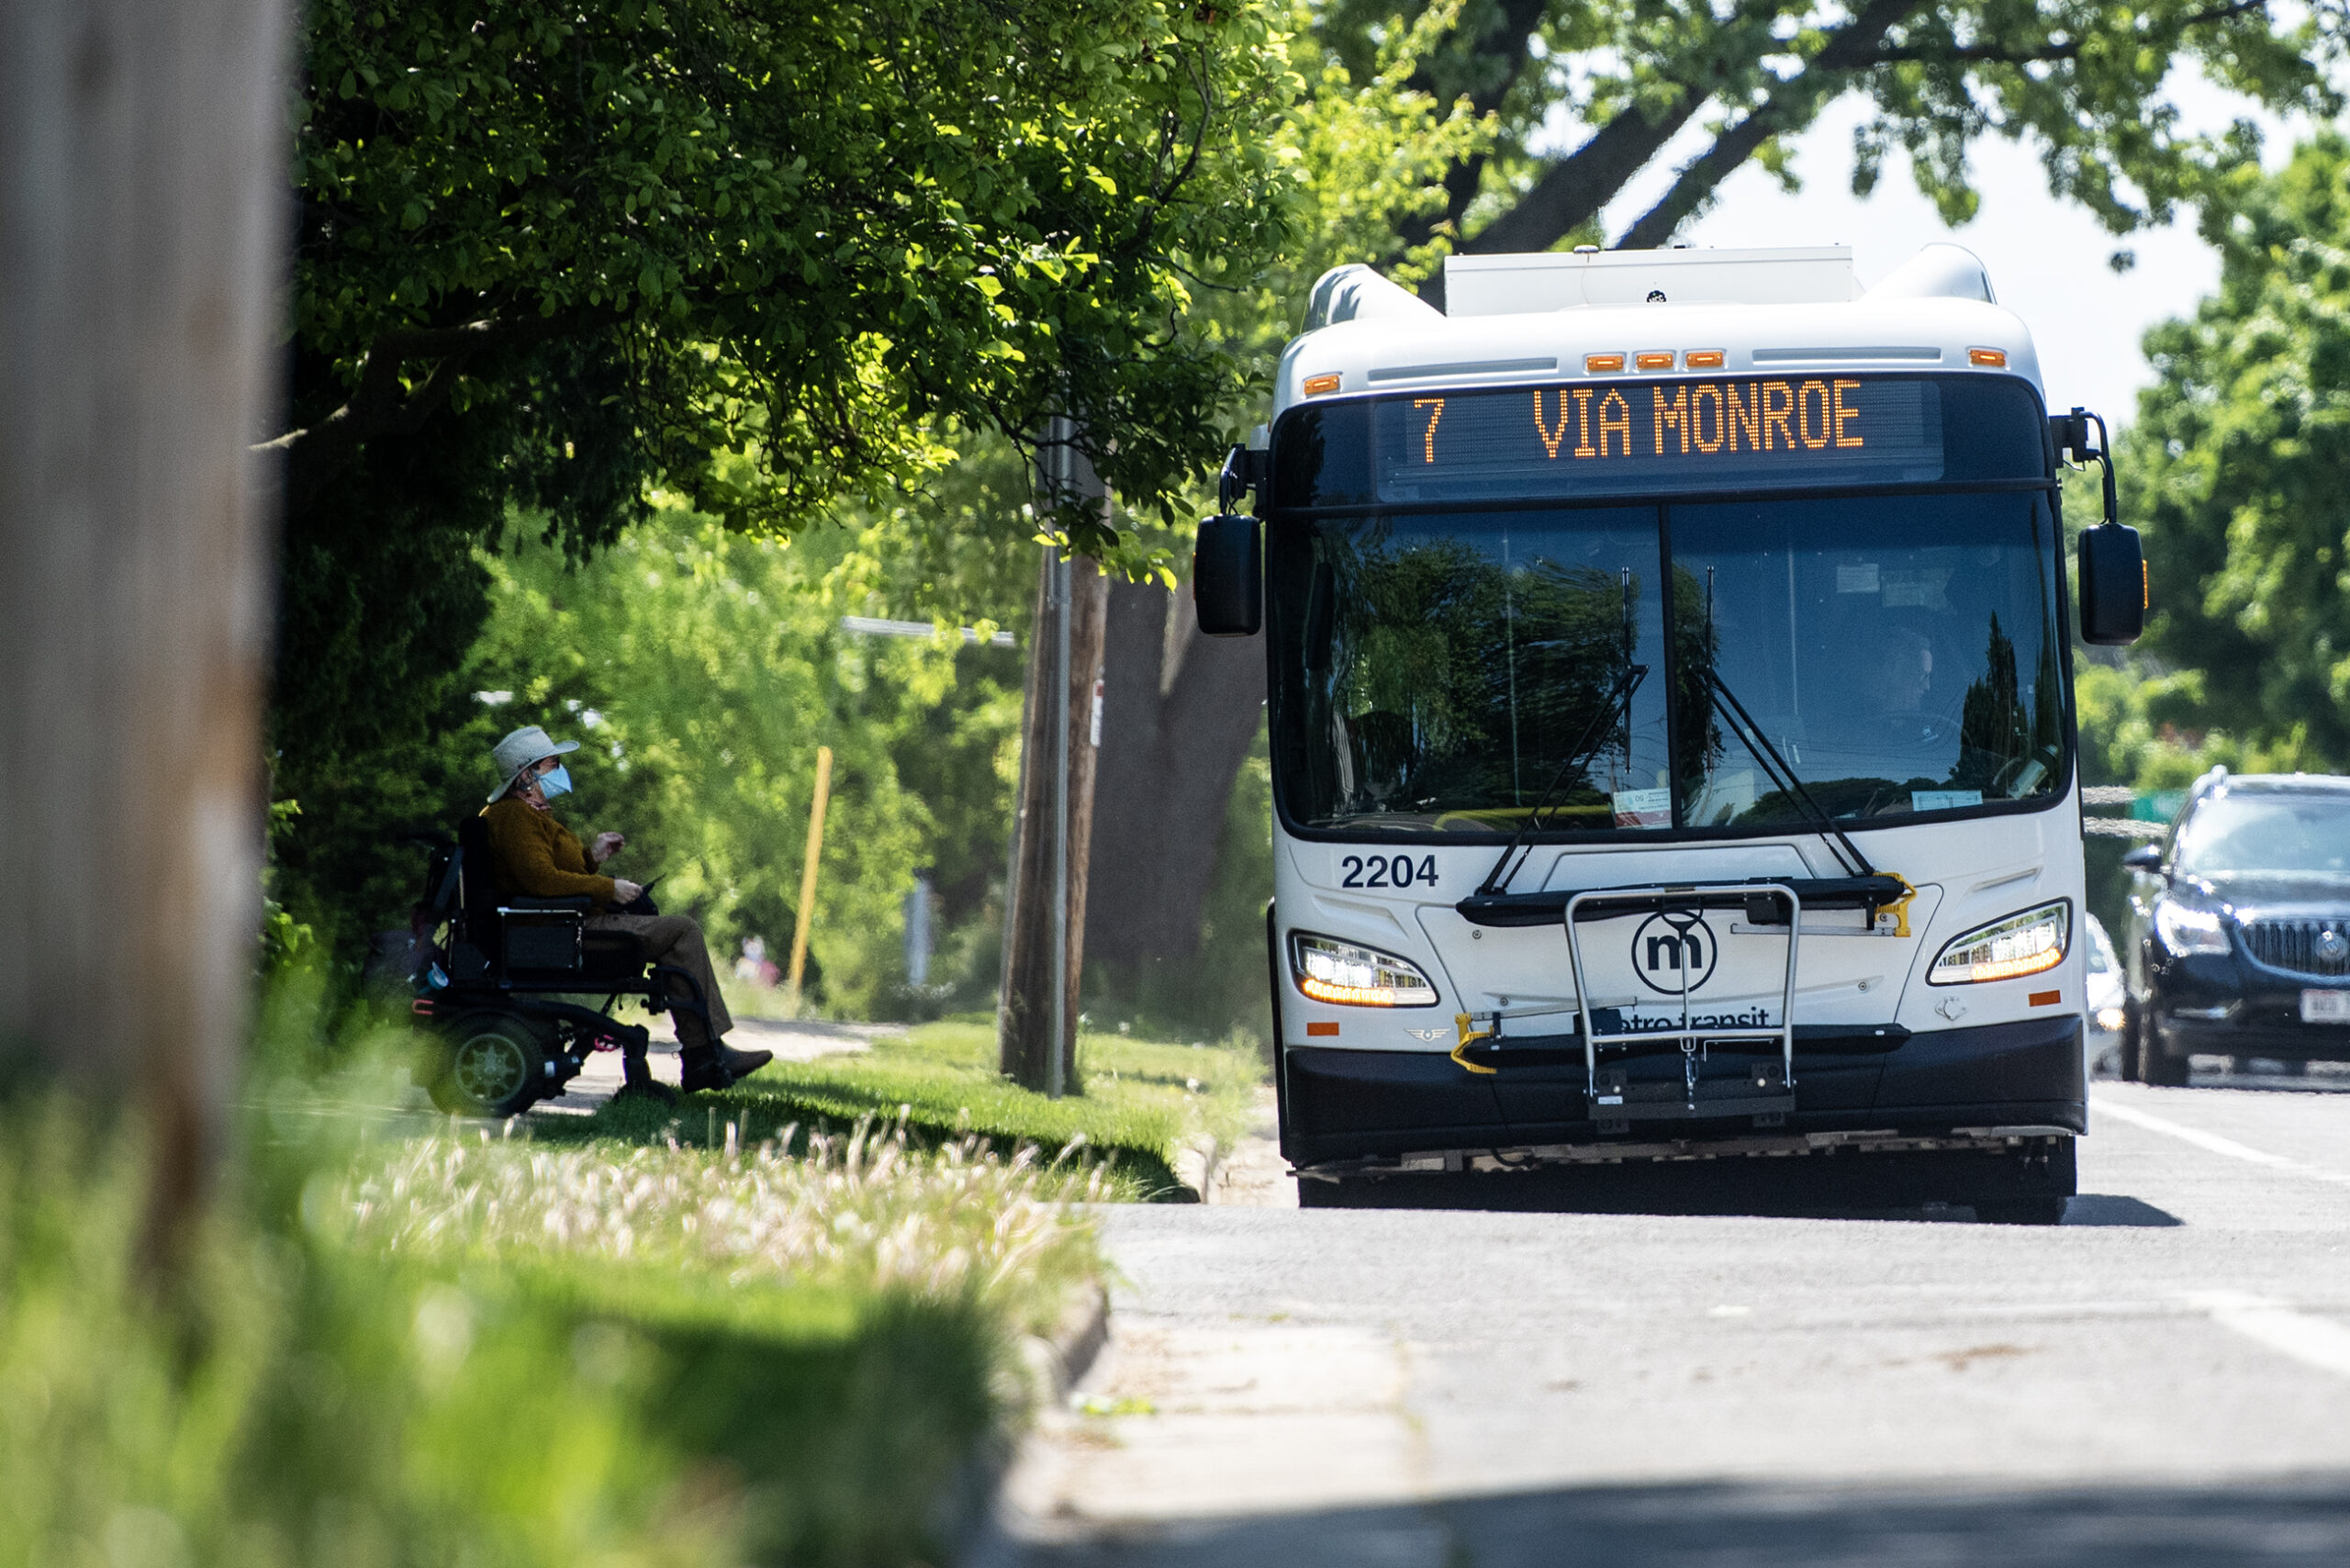 A bus lowers itself to allow a passenger waiting on a sidewalk in a wheelchair to board.